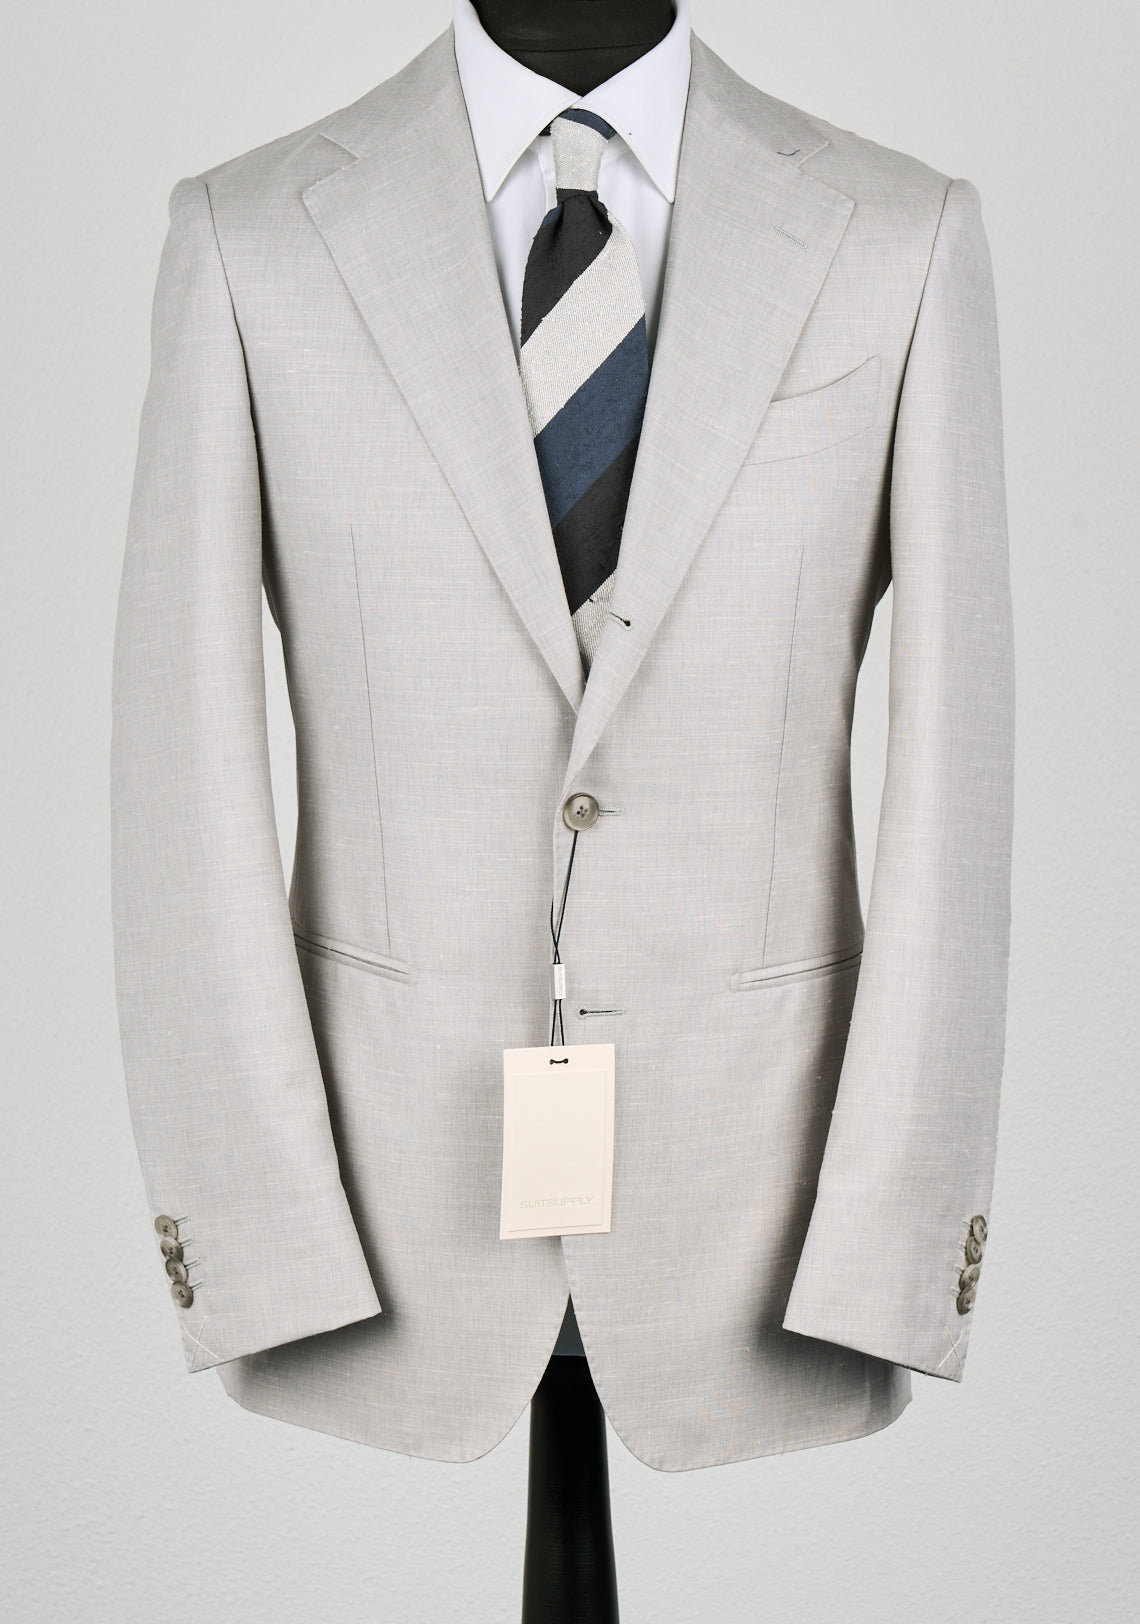 New Suitsupply Havana Light Gray Wool, Mulberry Silk and Linen Suit - Size 38R, 44R, 44L, 46R